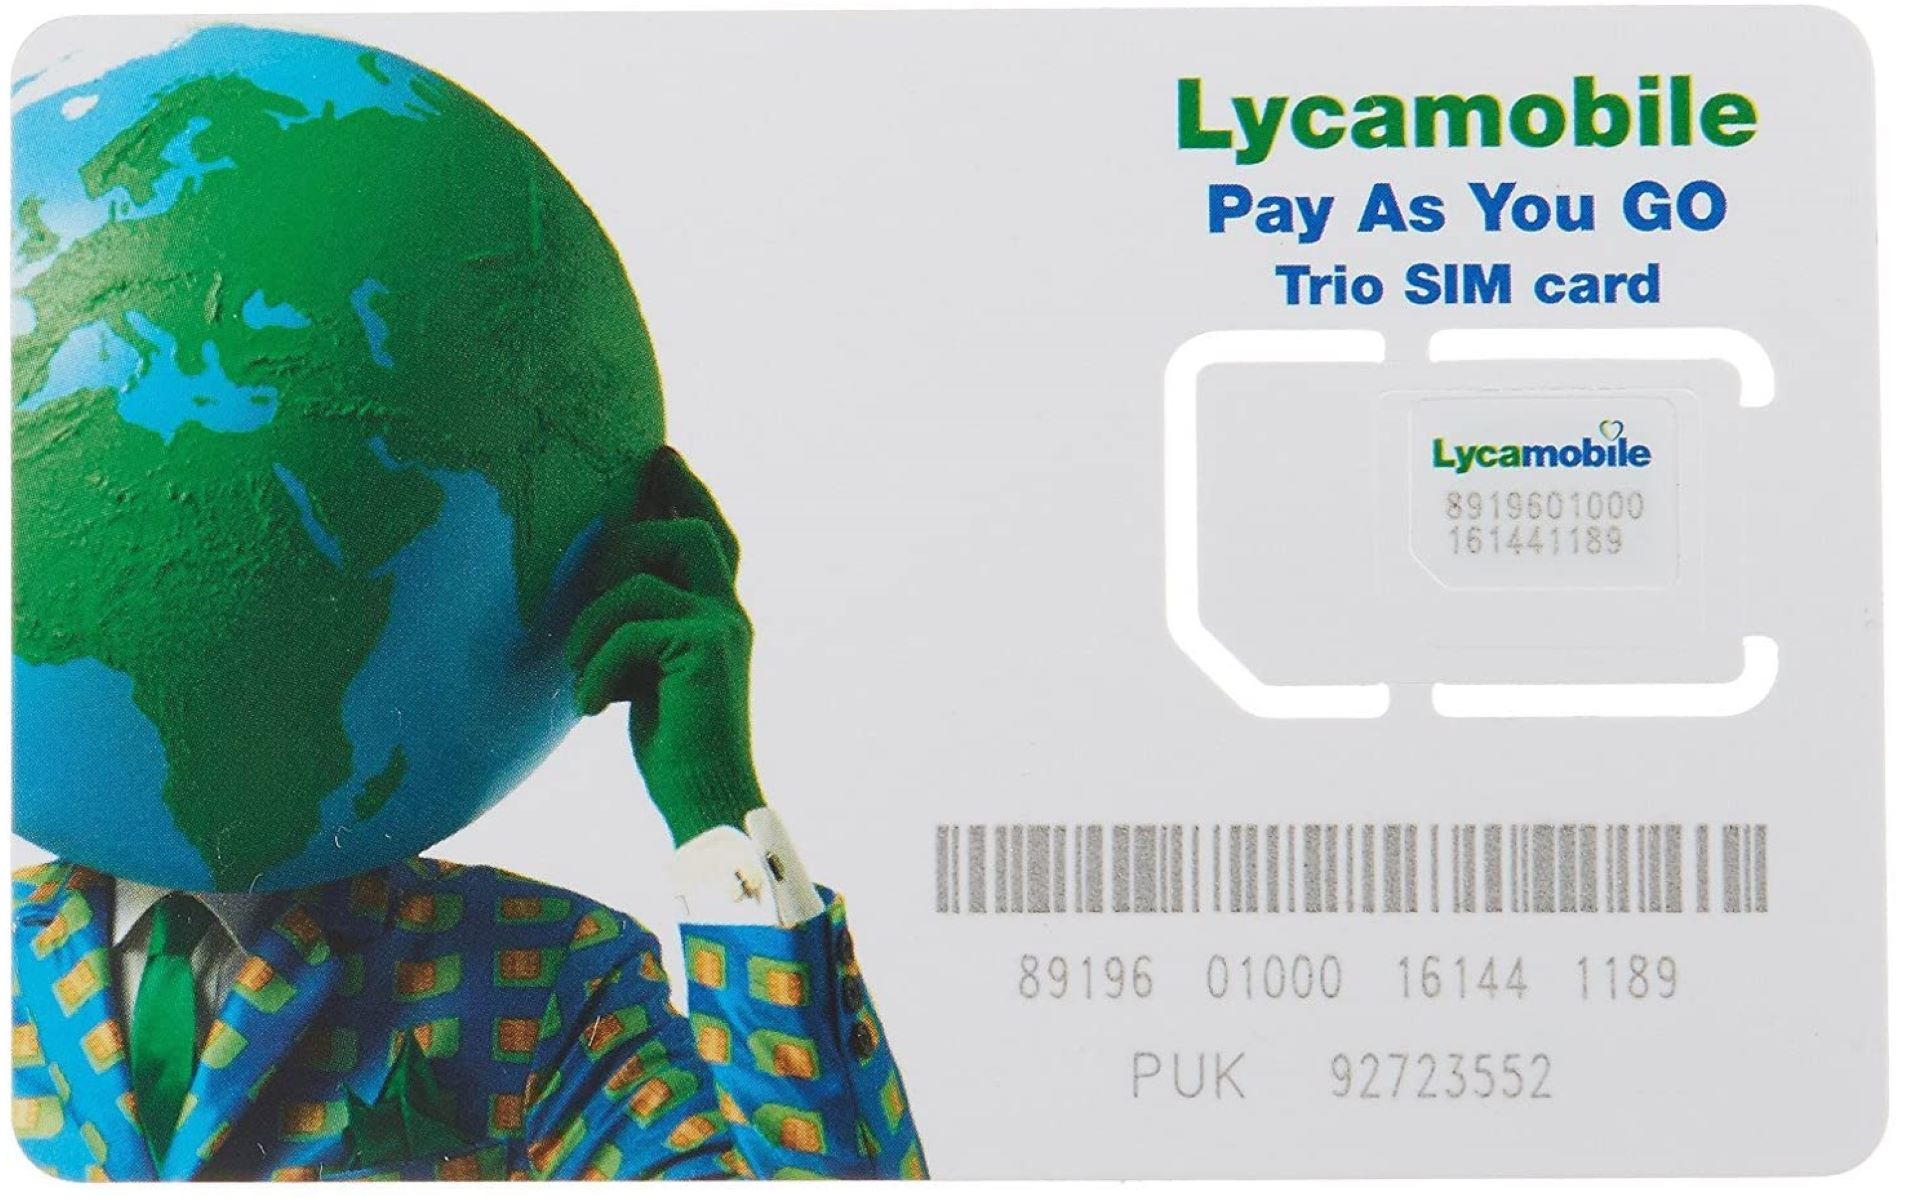 activating-your-lycamobile-sim-card-a-quick-guide